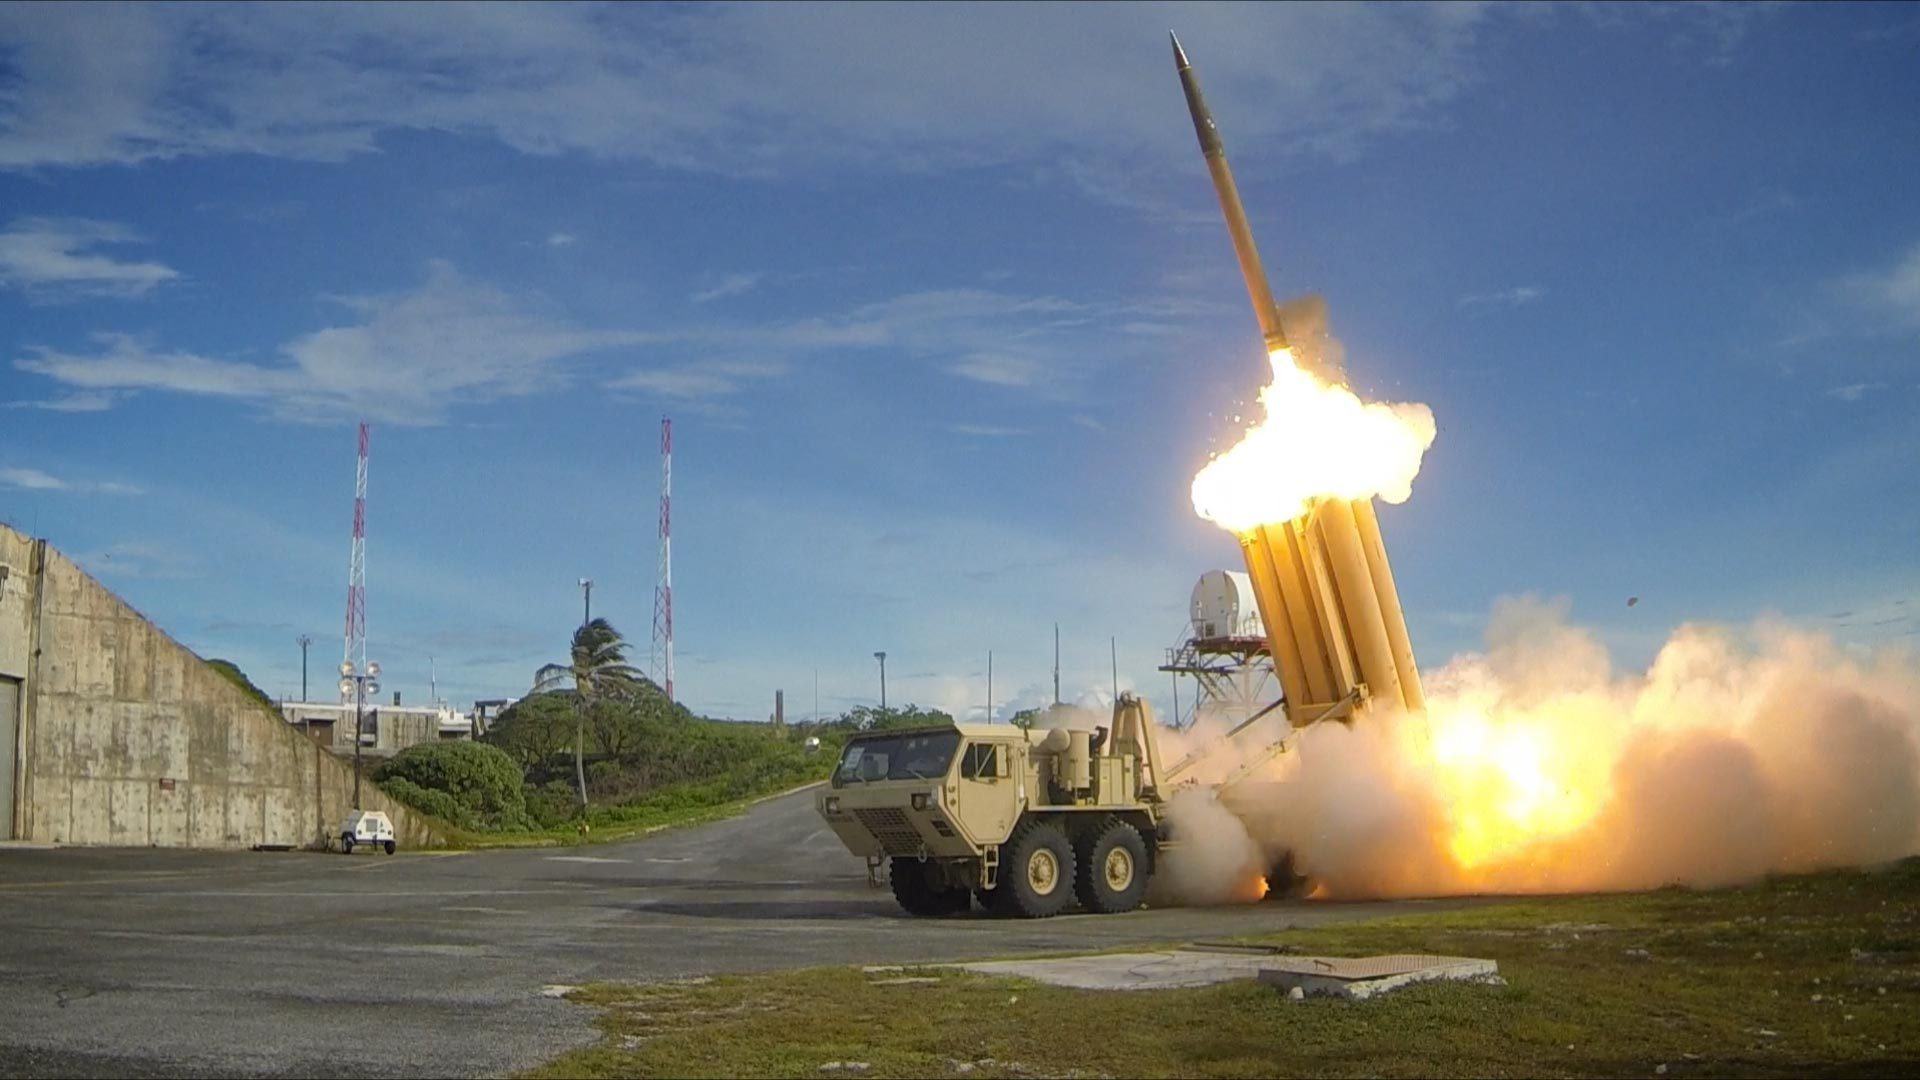 The_first_of_two_Terminal_High_Altitude_Area_Defense_(THAAD)_interceptors_is_launched_during_a_successful_intercept_test_-_US_Army.jpg